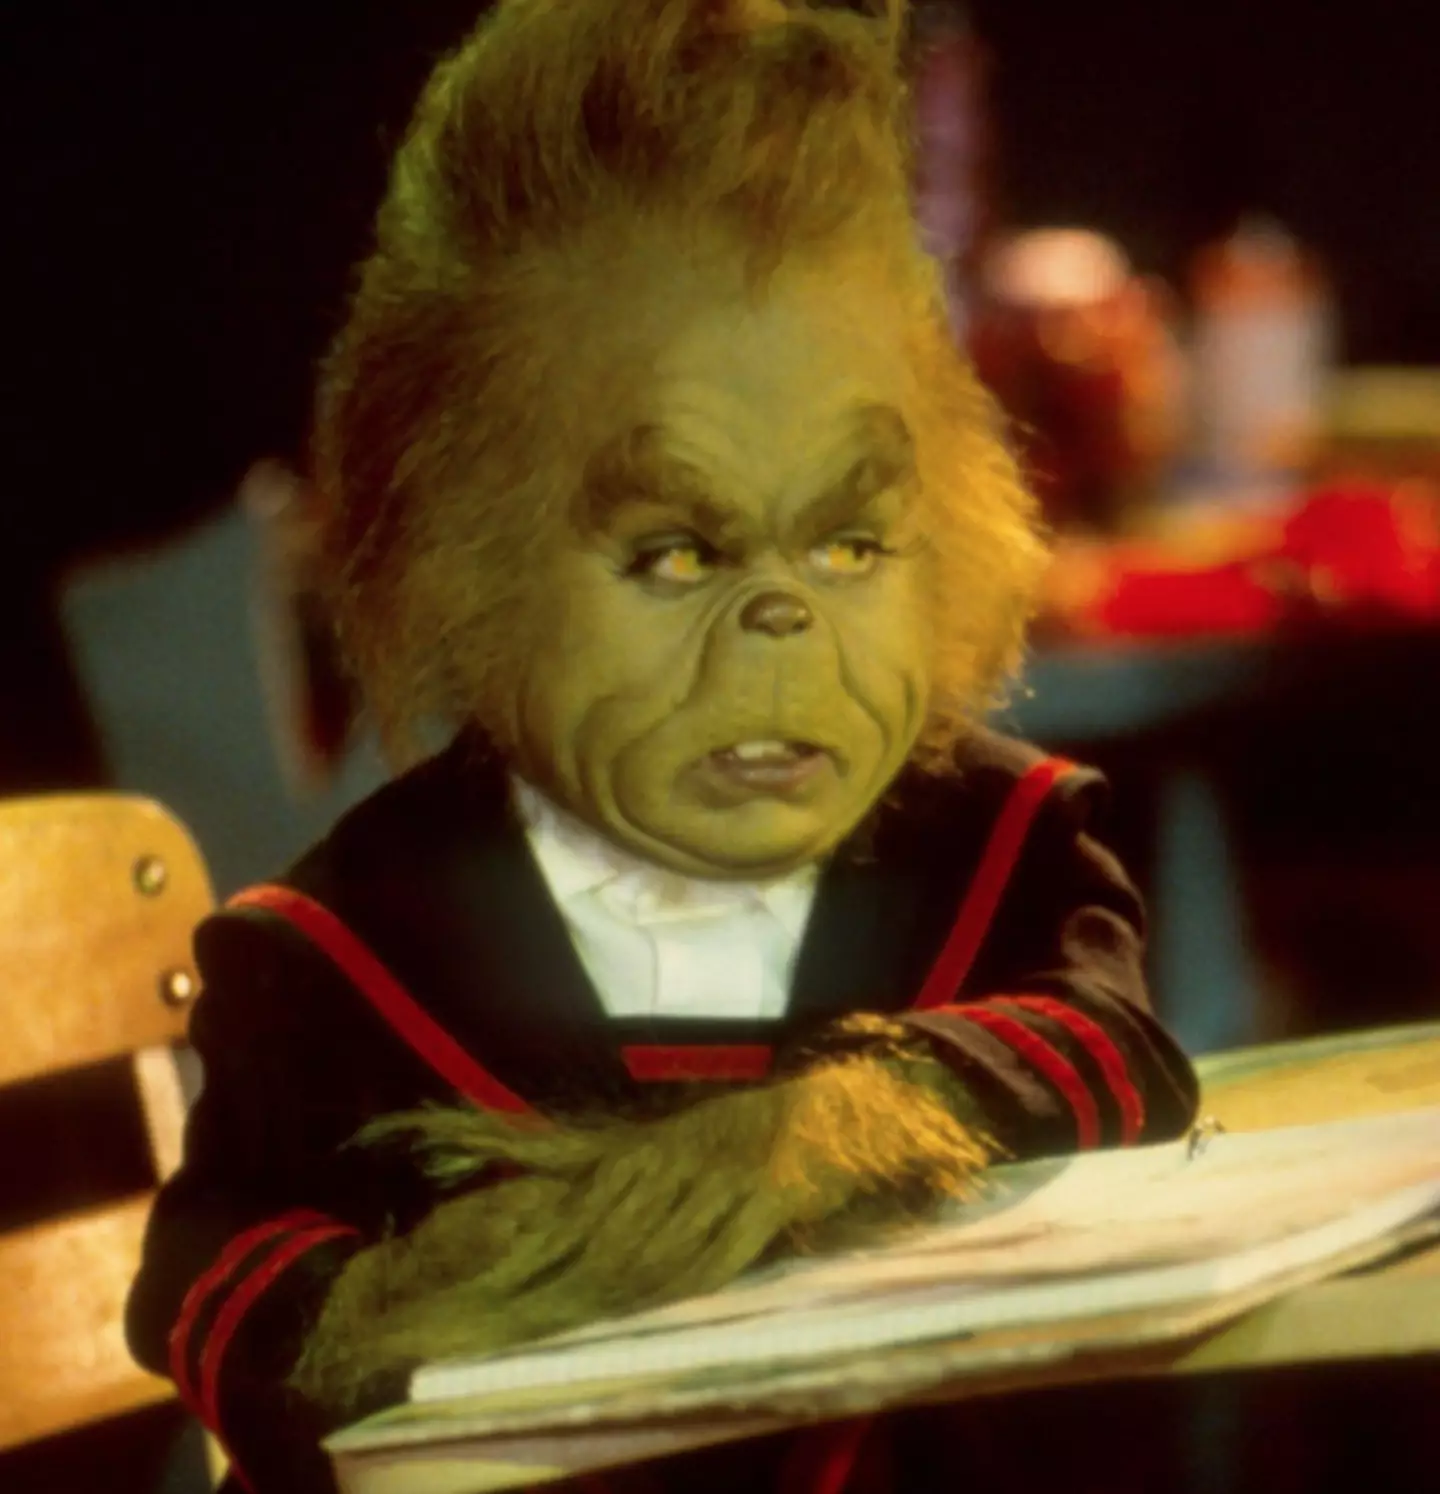 Josh Ryan Evans starred as the young Grinch in the 2000 film How the Grinch Stole Christmas.